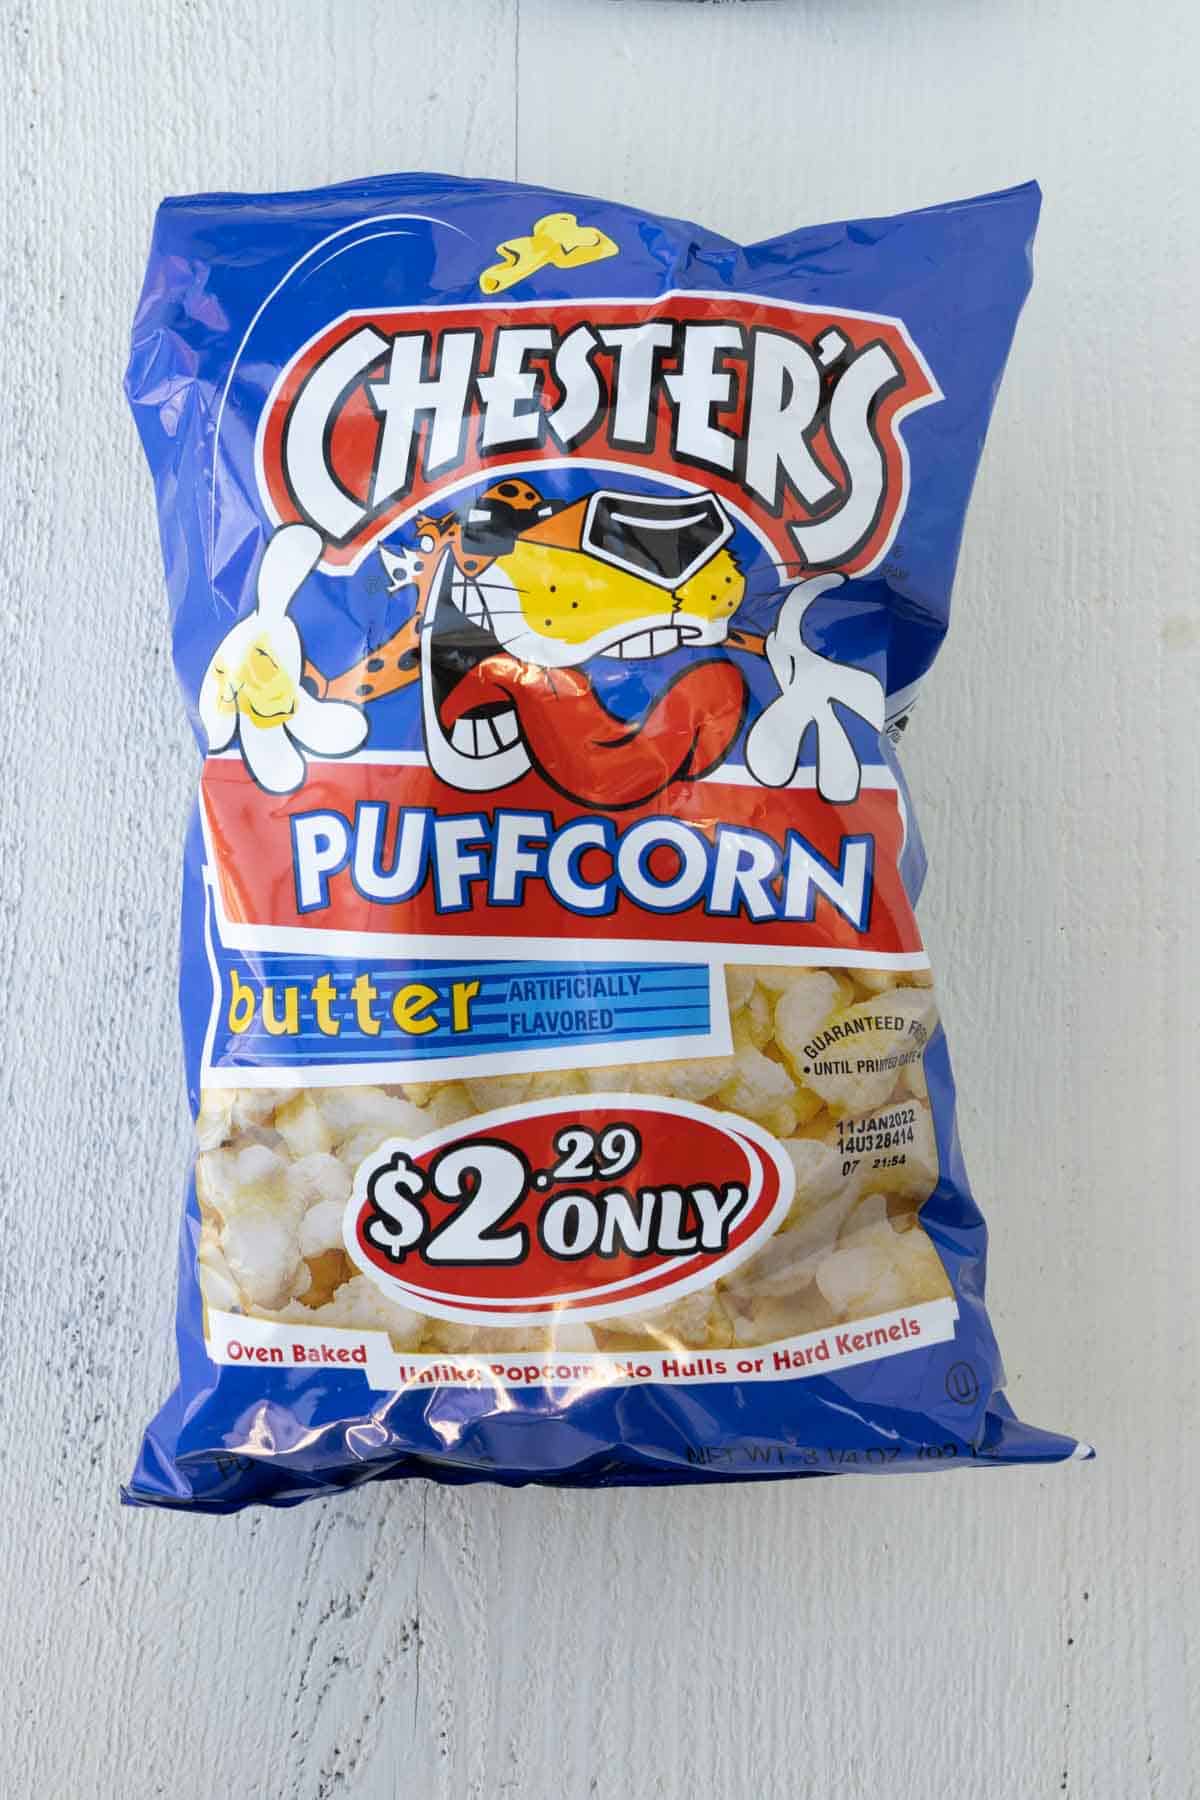 A bag of butter flavored Chesters puffcorn.